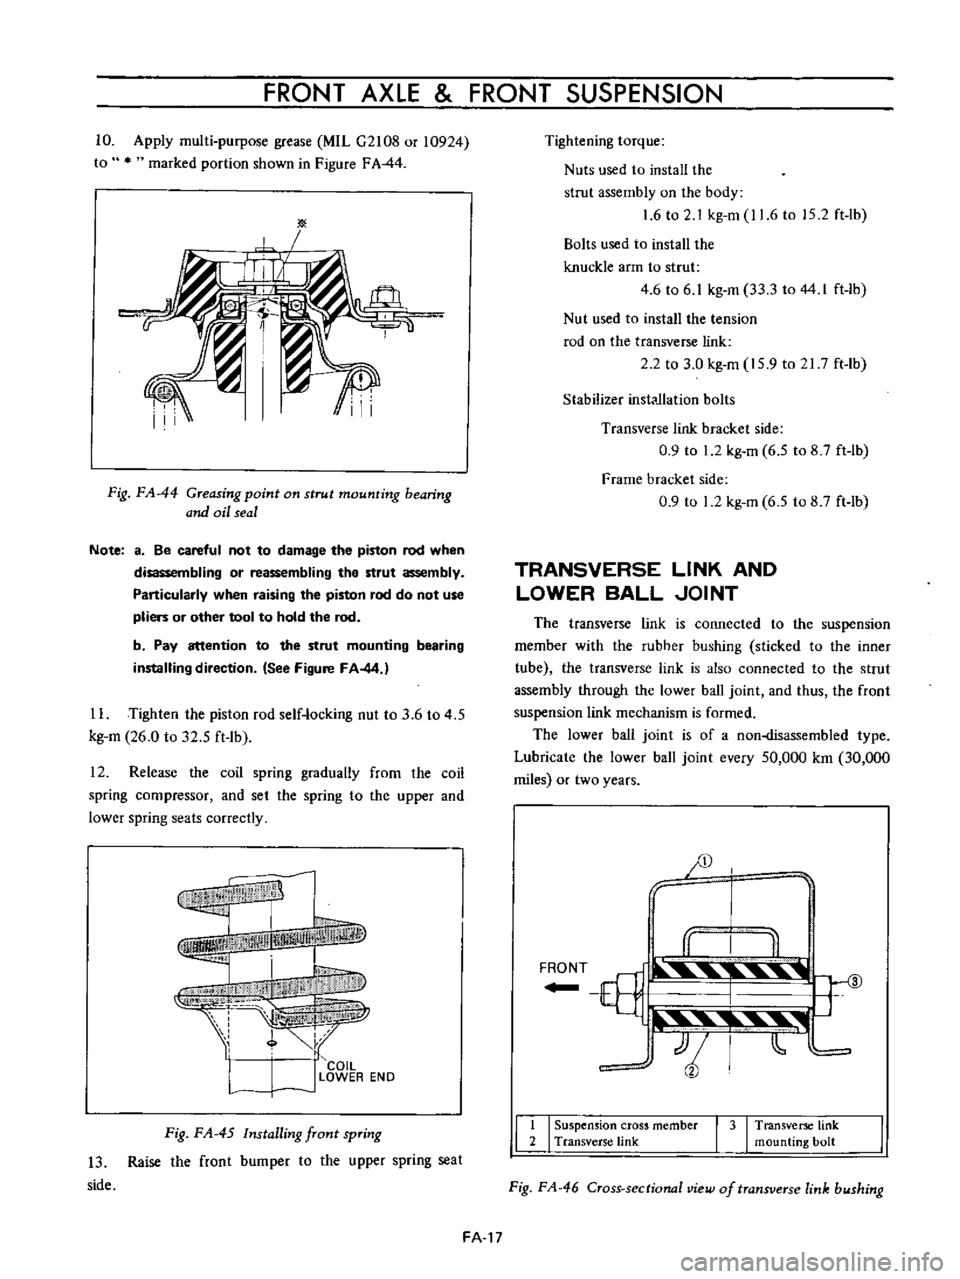 DATSUN B110 1973  Service Repair Manual 
FRONT 
AXLE 
FRONT 
SUSPENSION

10

Apply 
multi

purpose 
grease 
MIL

G2108 
or 
10924

to

marked

portion 
shown 
in

Figure 
FA
44

Fig 
FA 
44

Greasing 
point 
on 
strut

mounting 
bearing

an